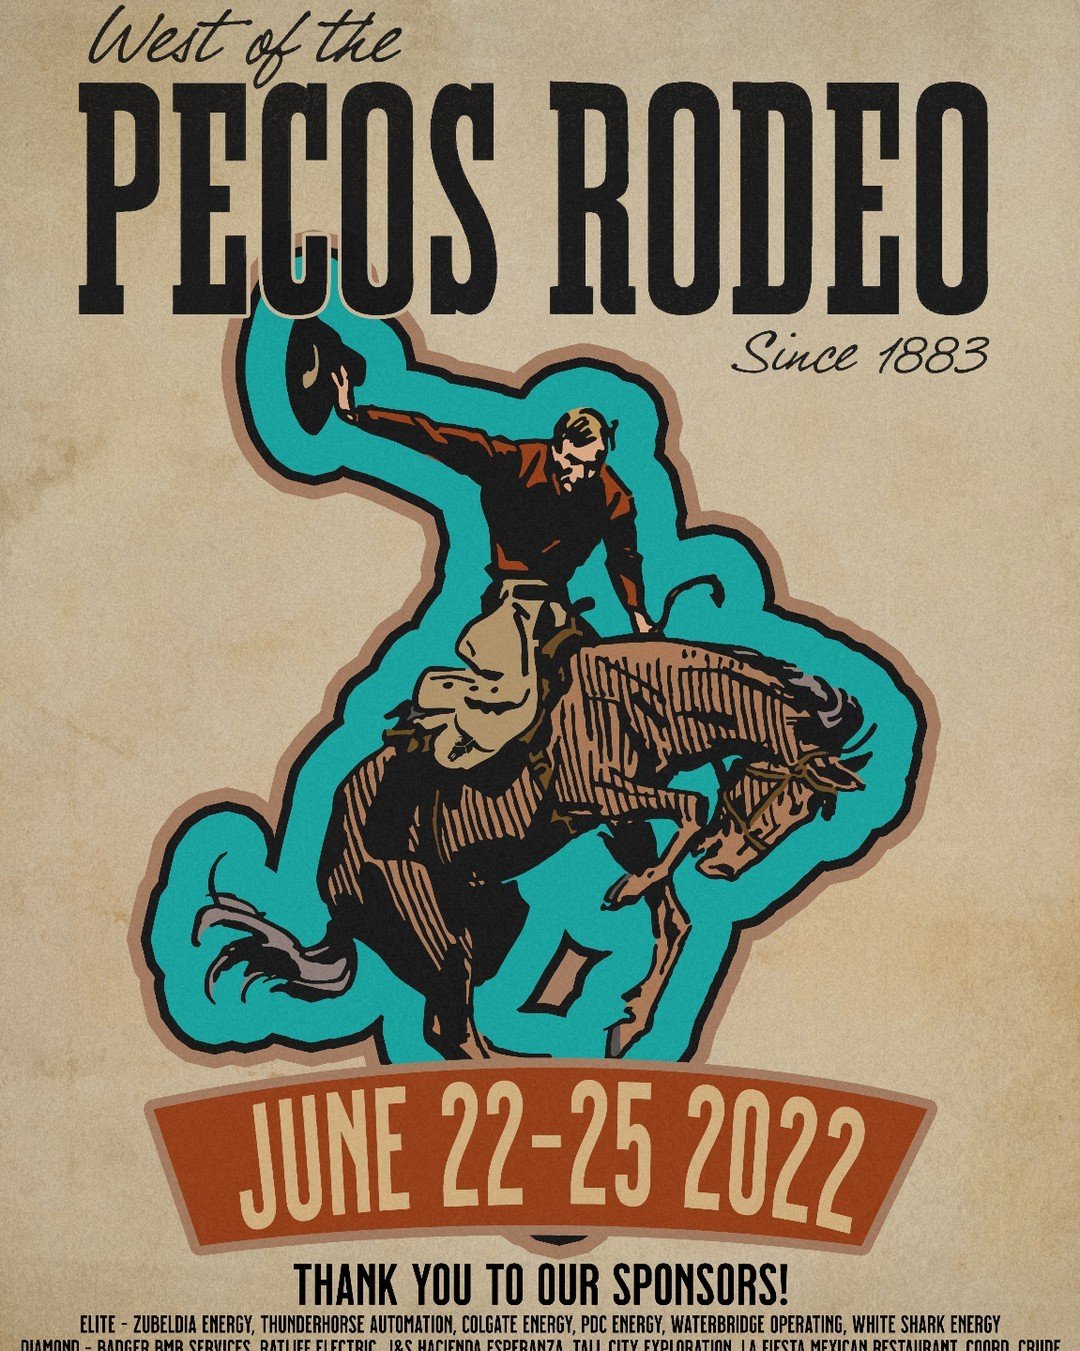 🌵 We're back in the saddle with West of The Pecos Rodeo, bringing our A-game in website designs, social media sparkle, and creative magic! ✨ Feast your eyes on the 2022 poster we whipped up &ndash; ain't it a stunner? Let us know your thoughts! 🎨 #